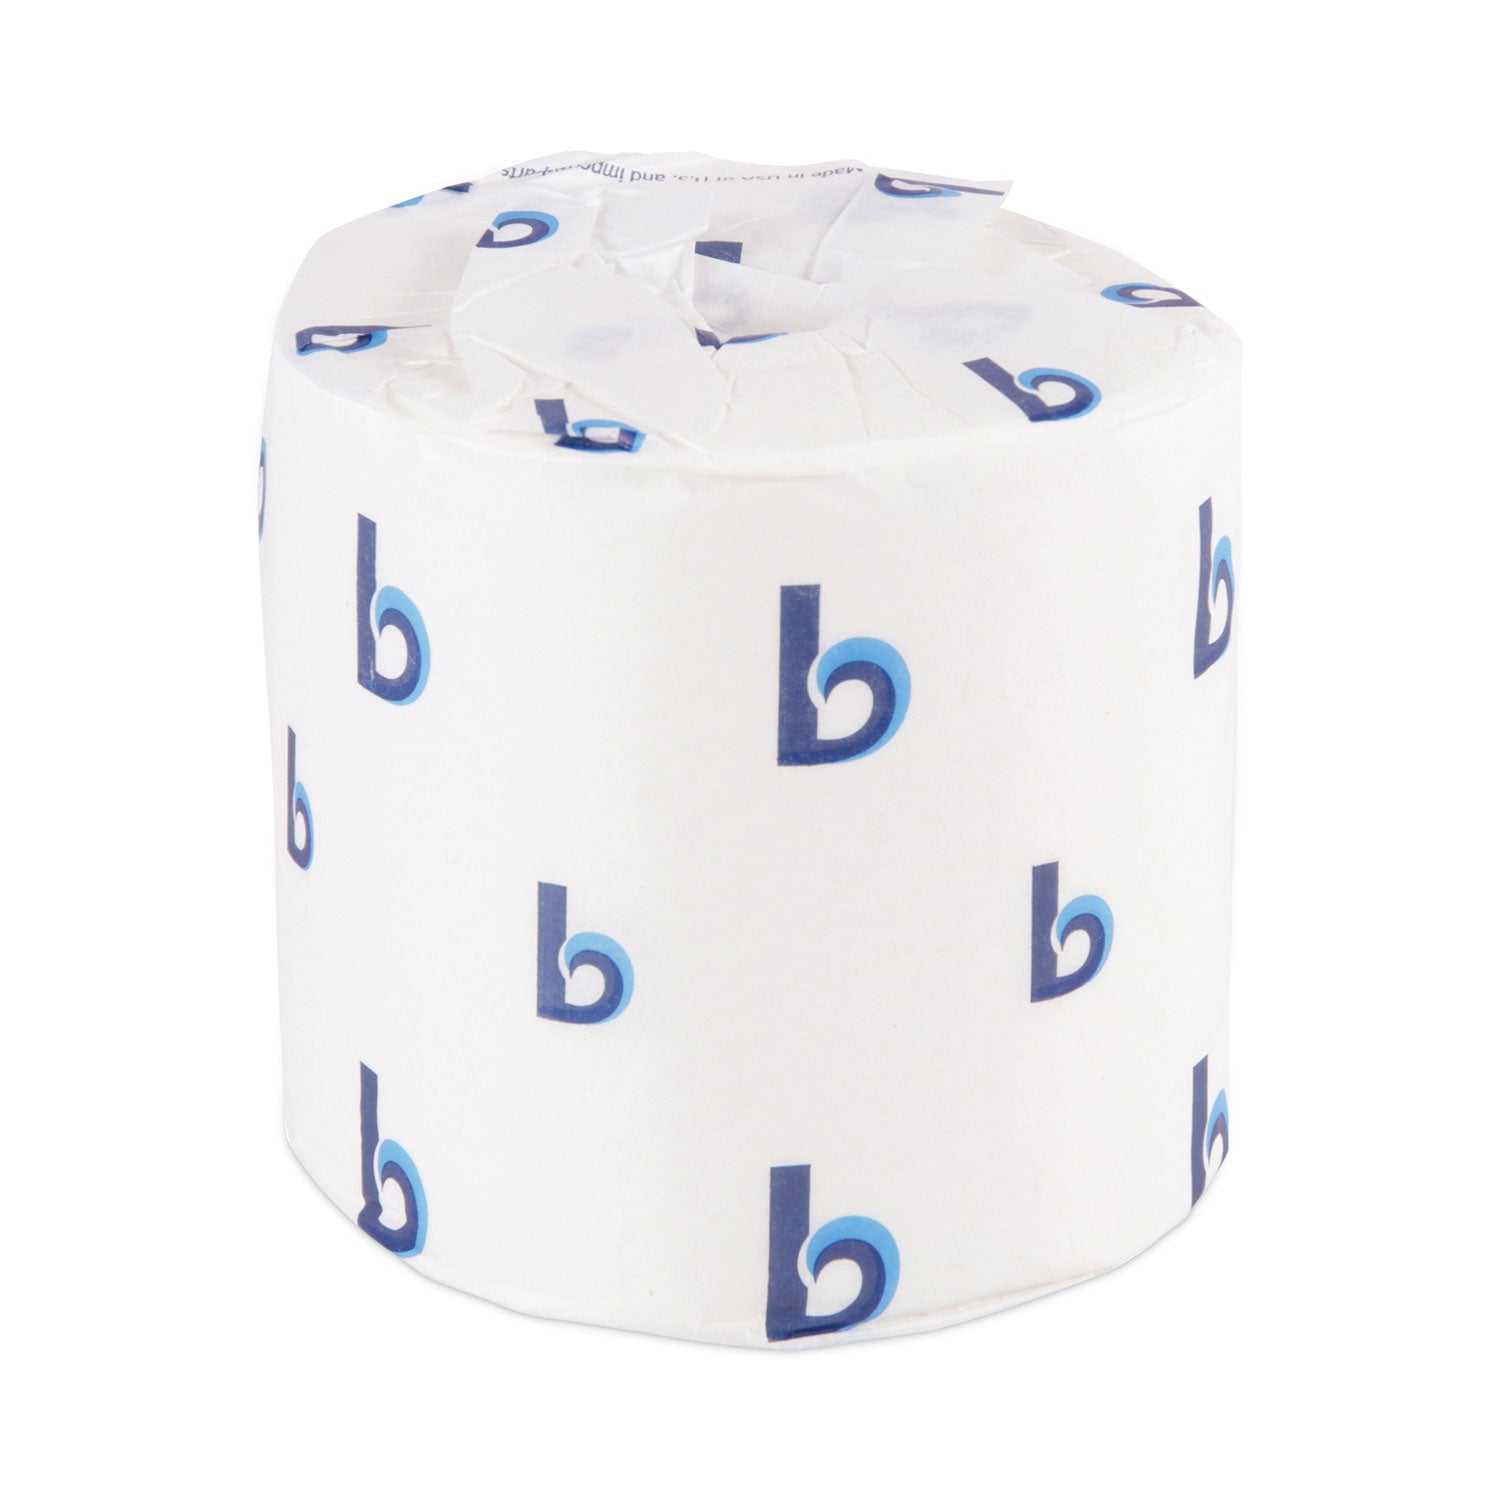 1-ply-toilet-tissue-septic-safe-white-1000-sheets-96-rolls-carton_bwk6170b - 1